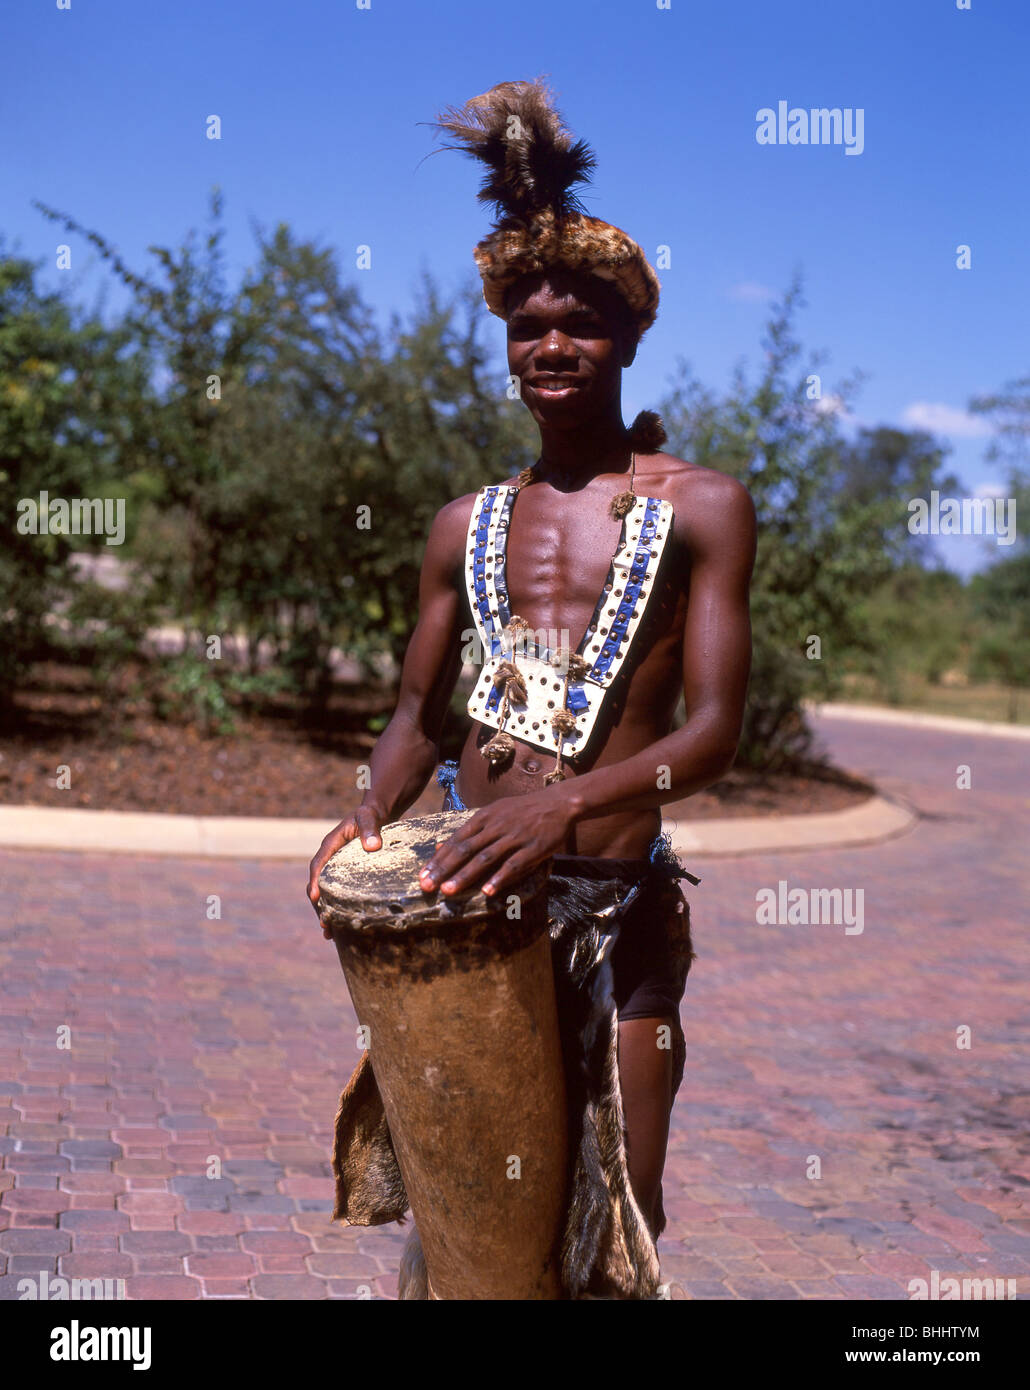 Man in native dress playing drums, Victoria Falls, Livingstone, Southern Province, Republic of Zambia Stock Photo